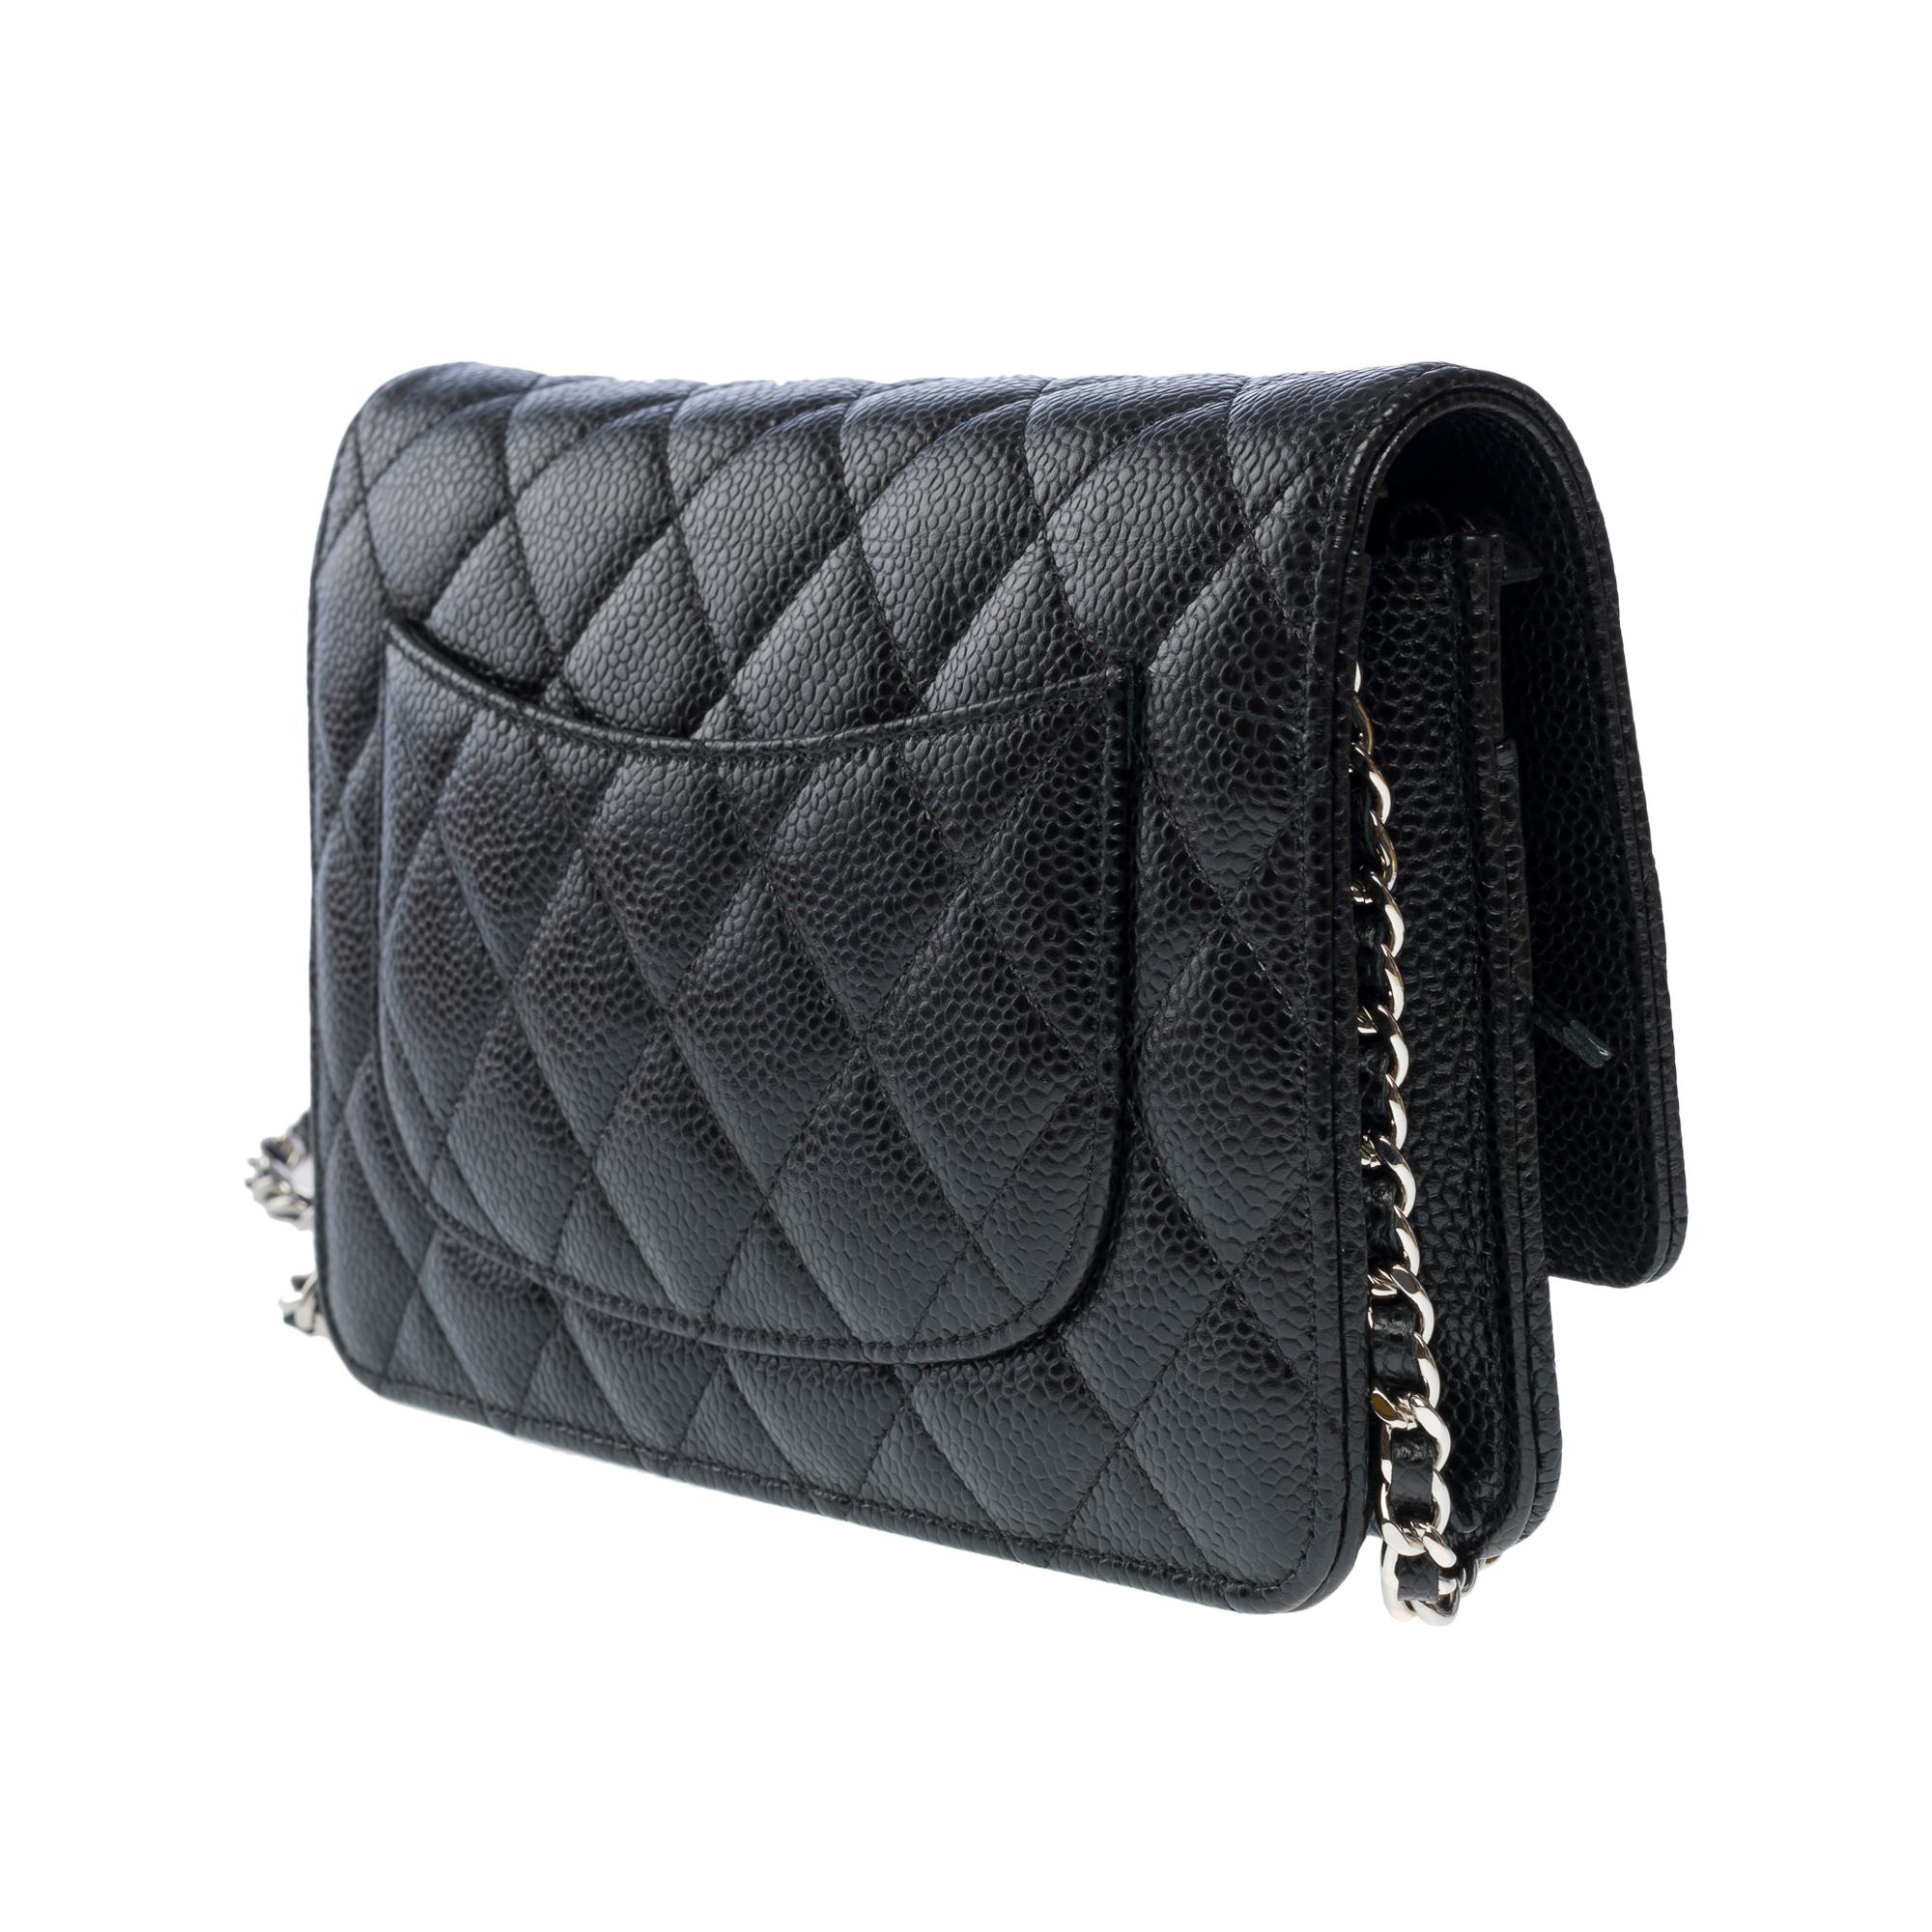 Chanel Wallet on Chain (WOC)  shoulder bag in black Caviar quilted leather, SHW 1